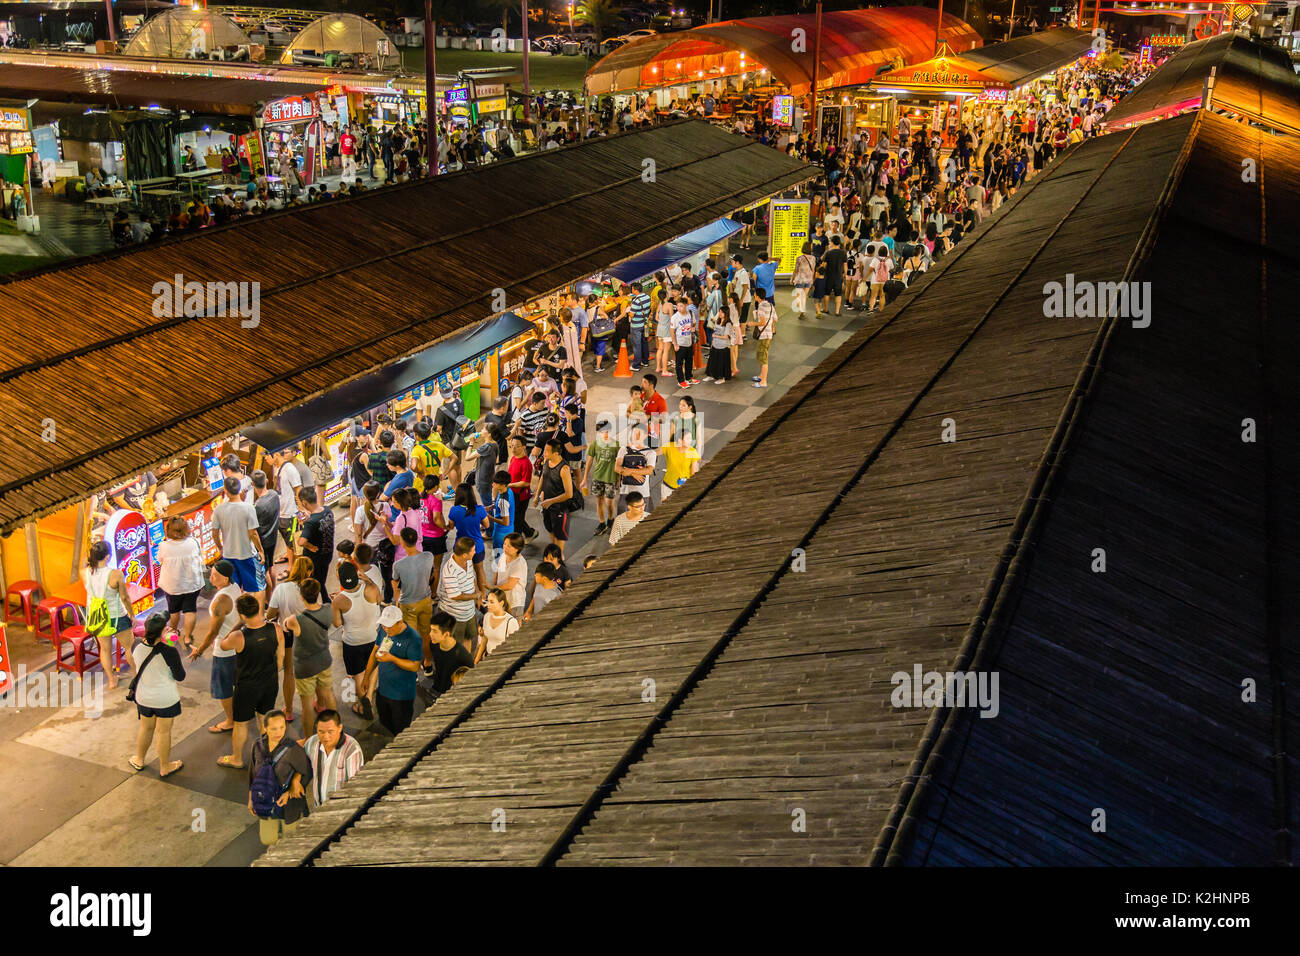 HUALIEN CITY, TAIWAN - AUGUST 19, 2017: Shoppers and tourists at Dongdamen Night Market Stock Photo